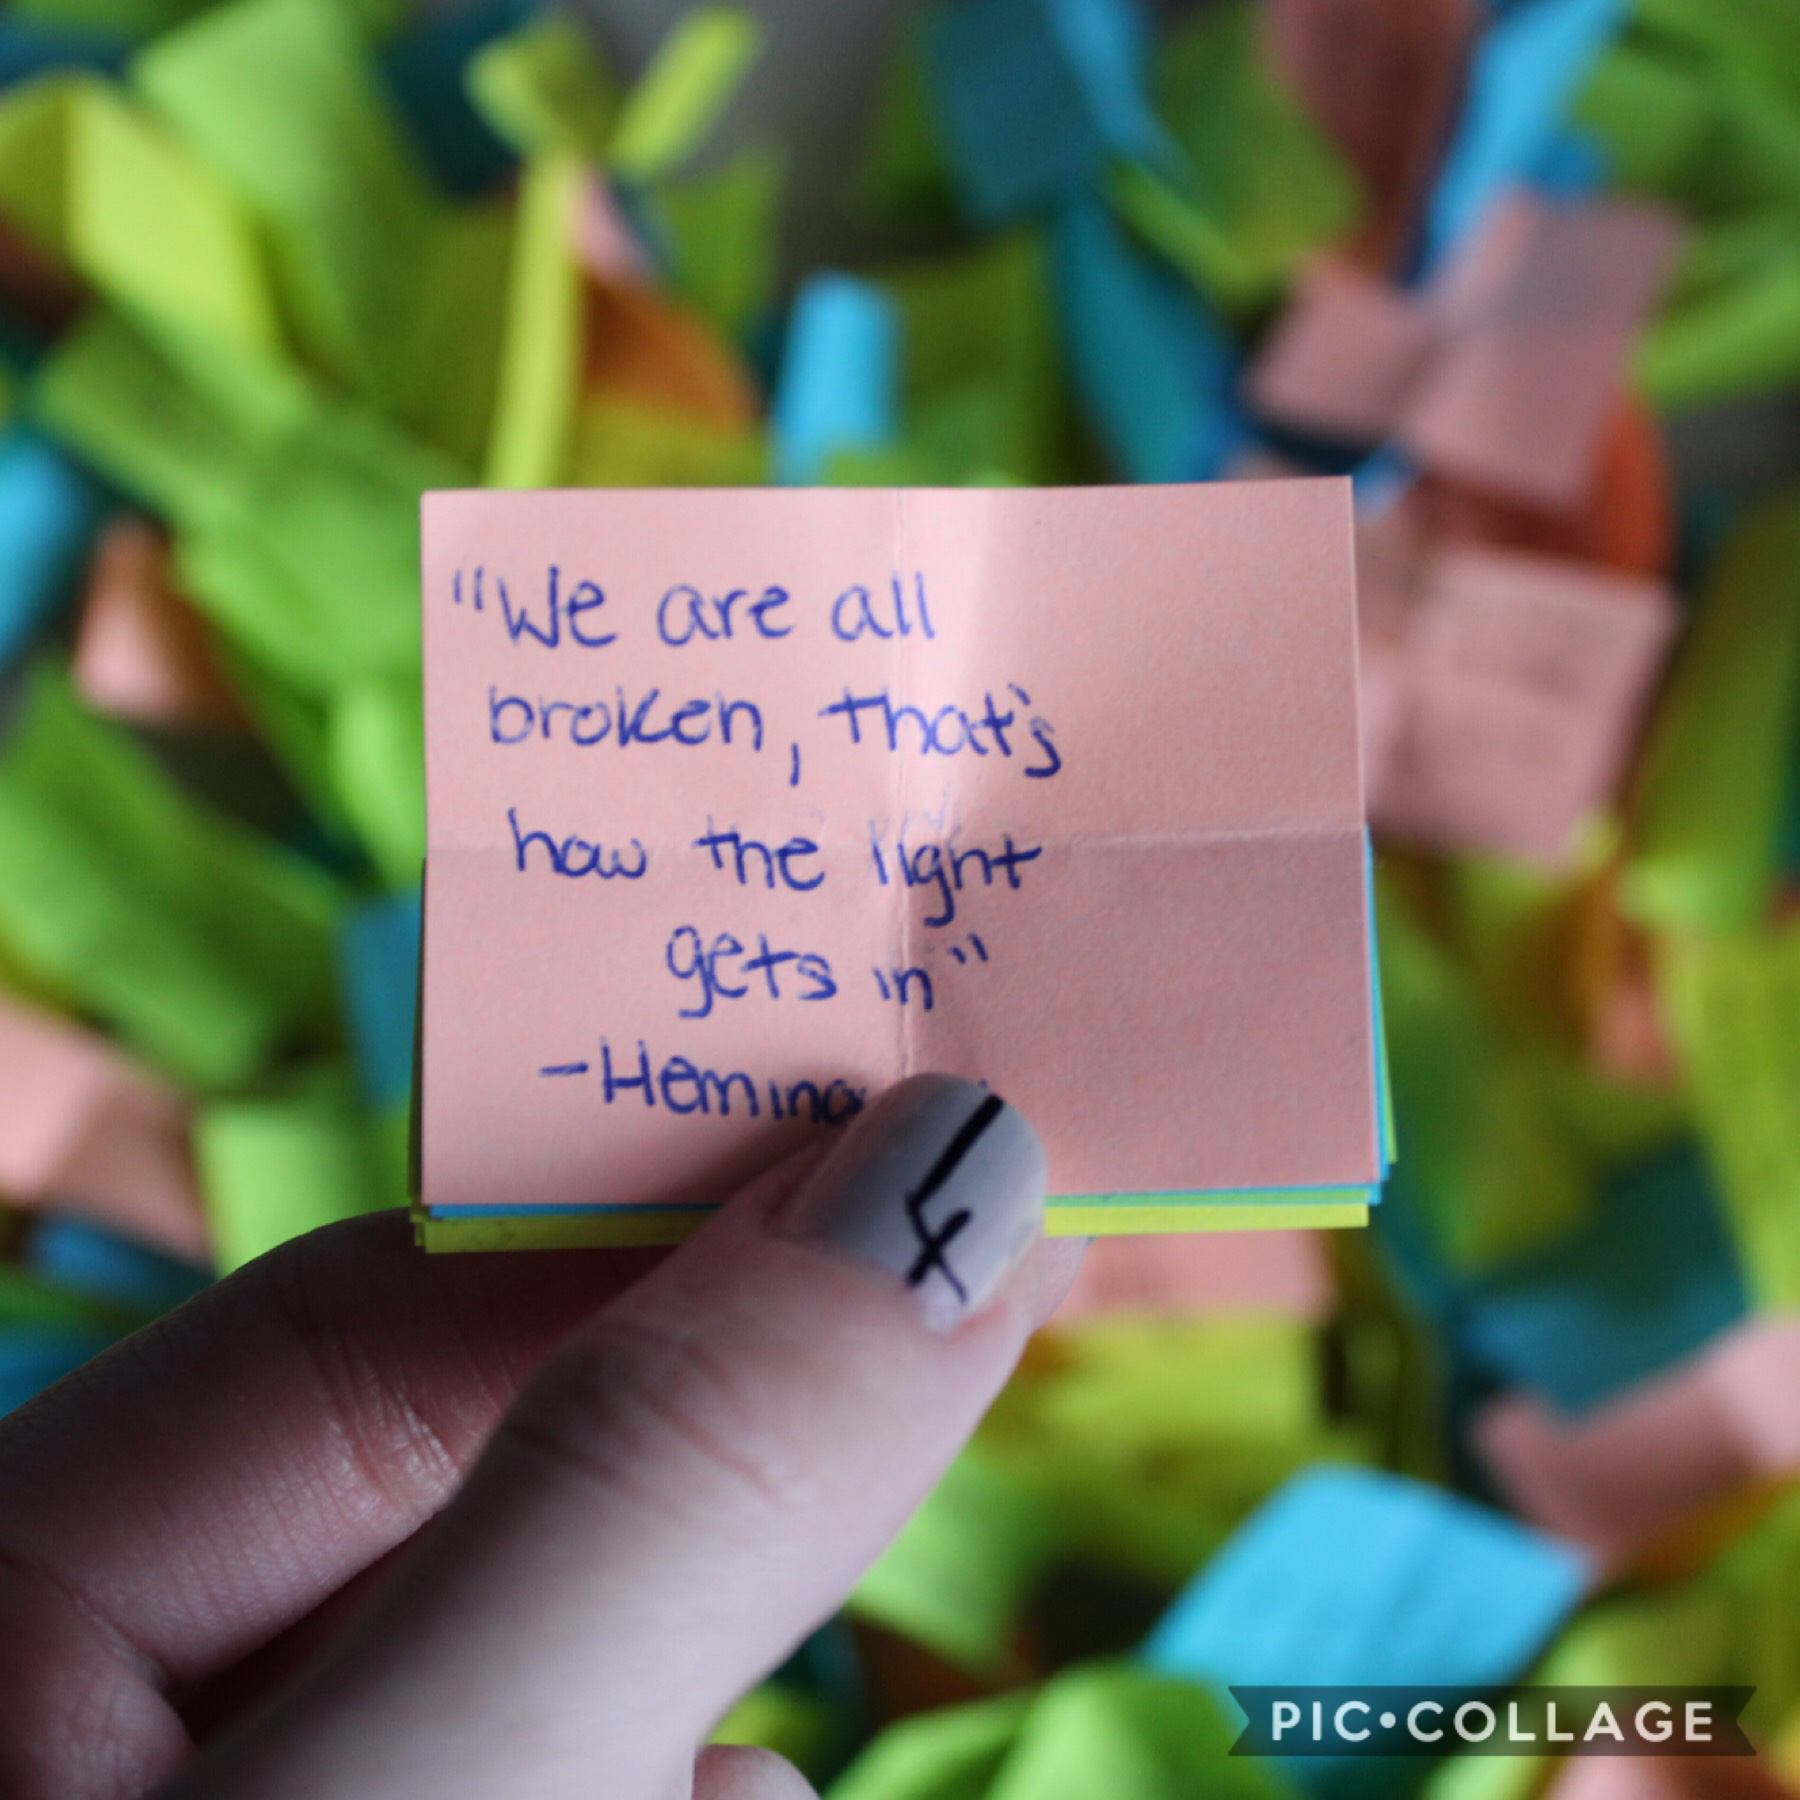 for this secret santa thing in my creative writing class back in 2017, i was given 365 days of quotes. i finally got around to reading them all so i’ll post a few motivational favorite ones here✨
my picture📷
💛stay strong everyone💛